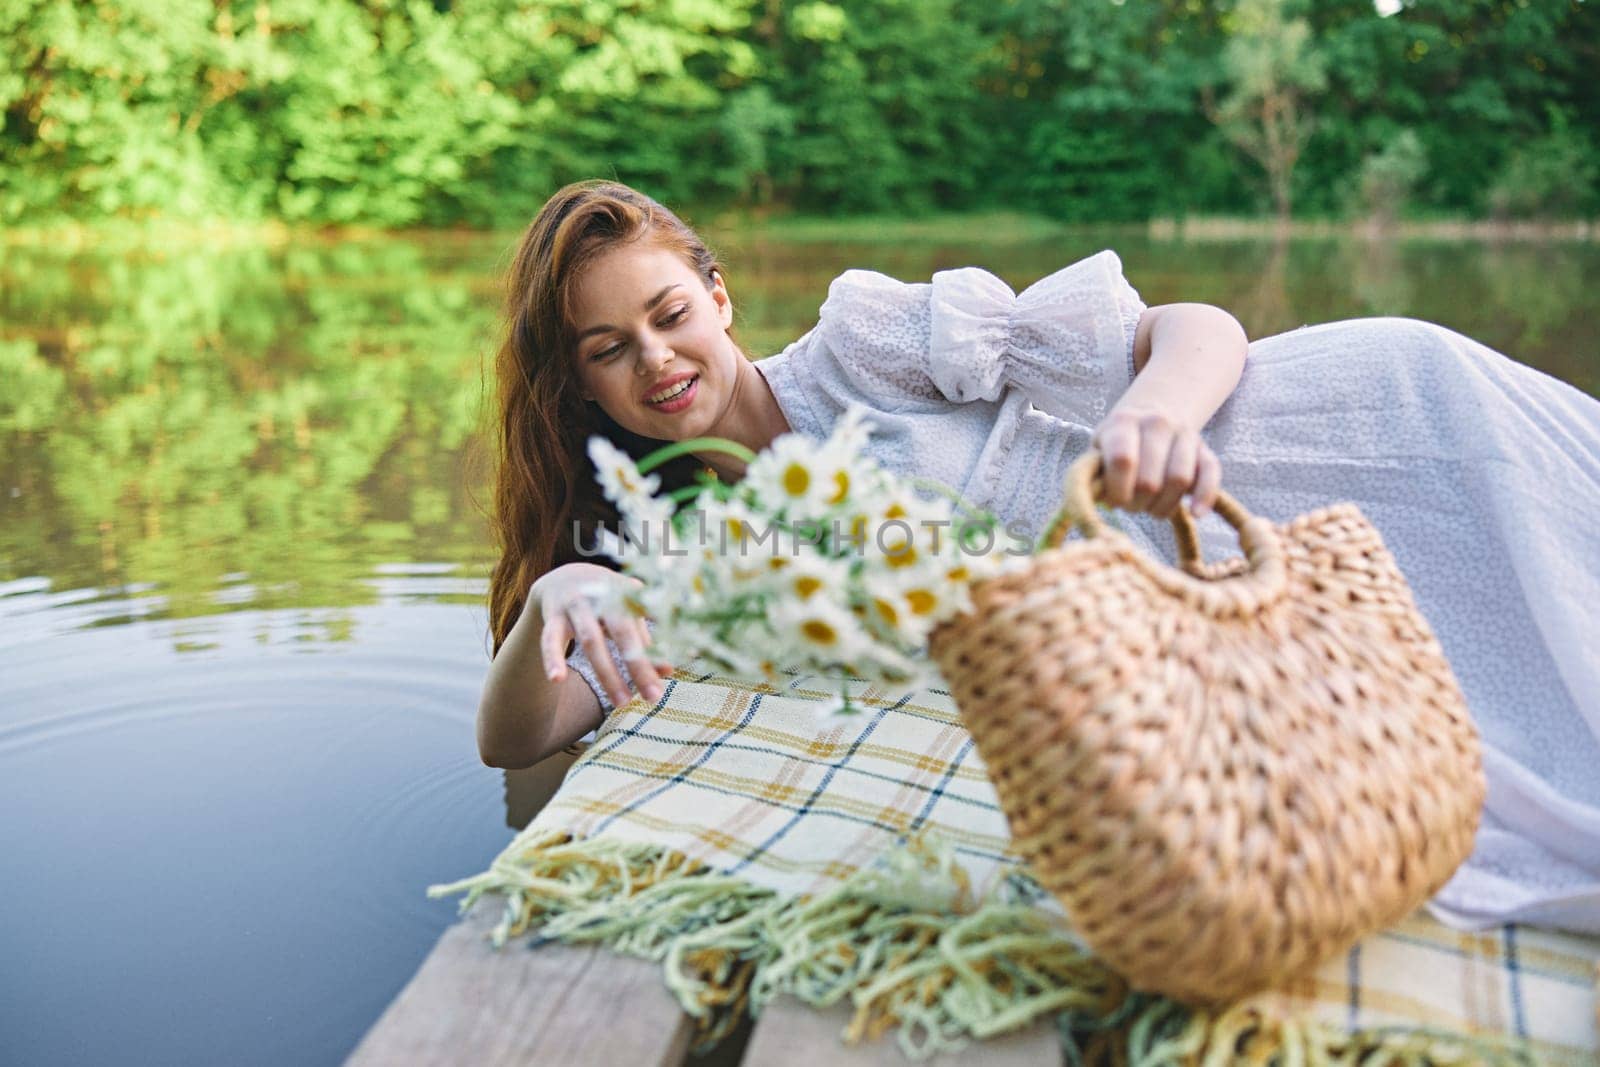 a lovely woman in a light dress lies on a pier by the lake on a sunny day with a basket of daisies in her hands. High quality photo